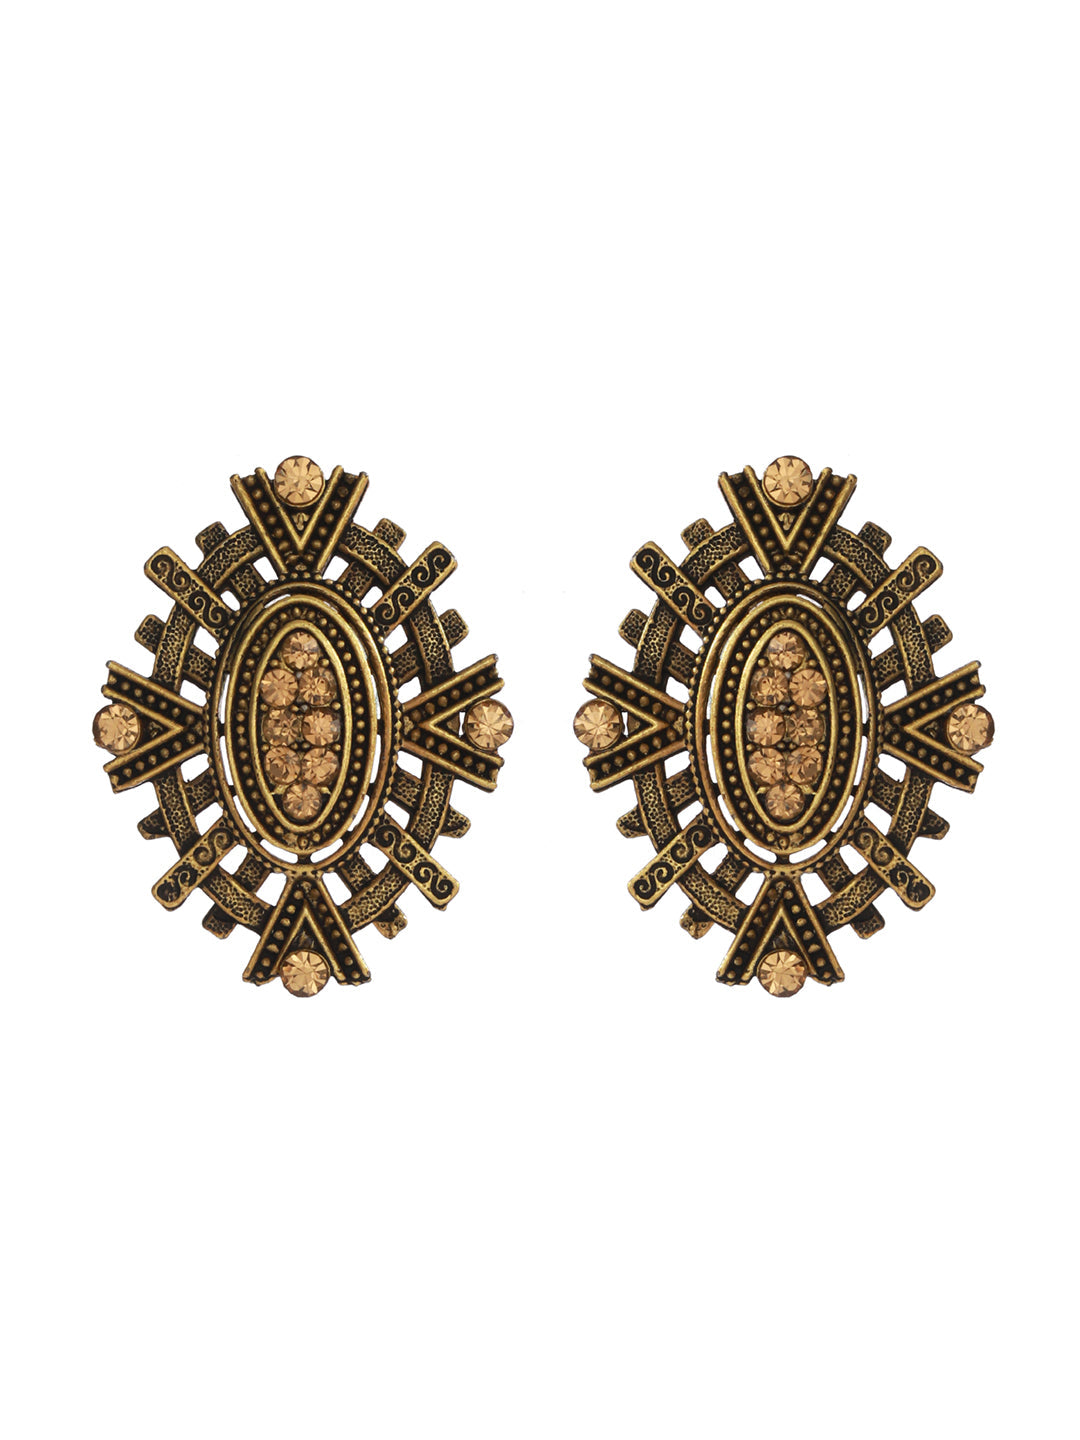 Studded Floral Gold and Silver Plated Earring Set - NOZ2TOZ